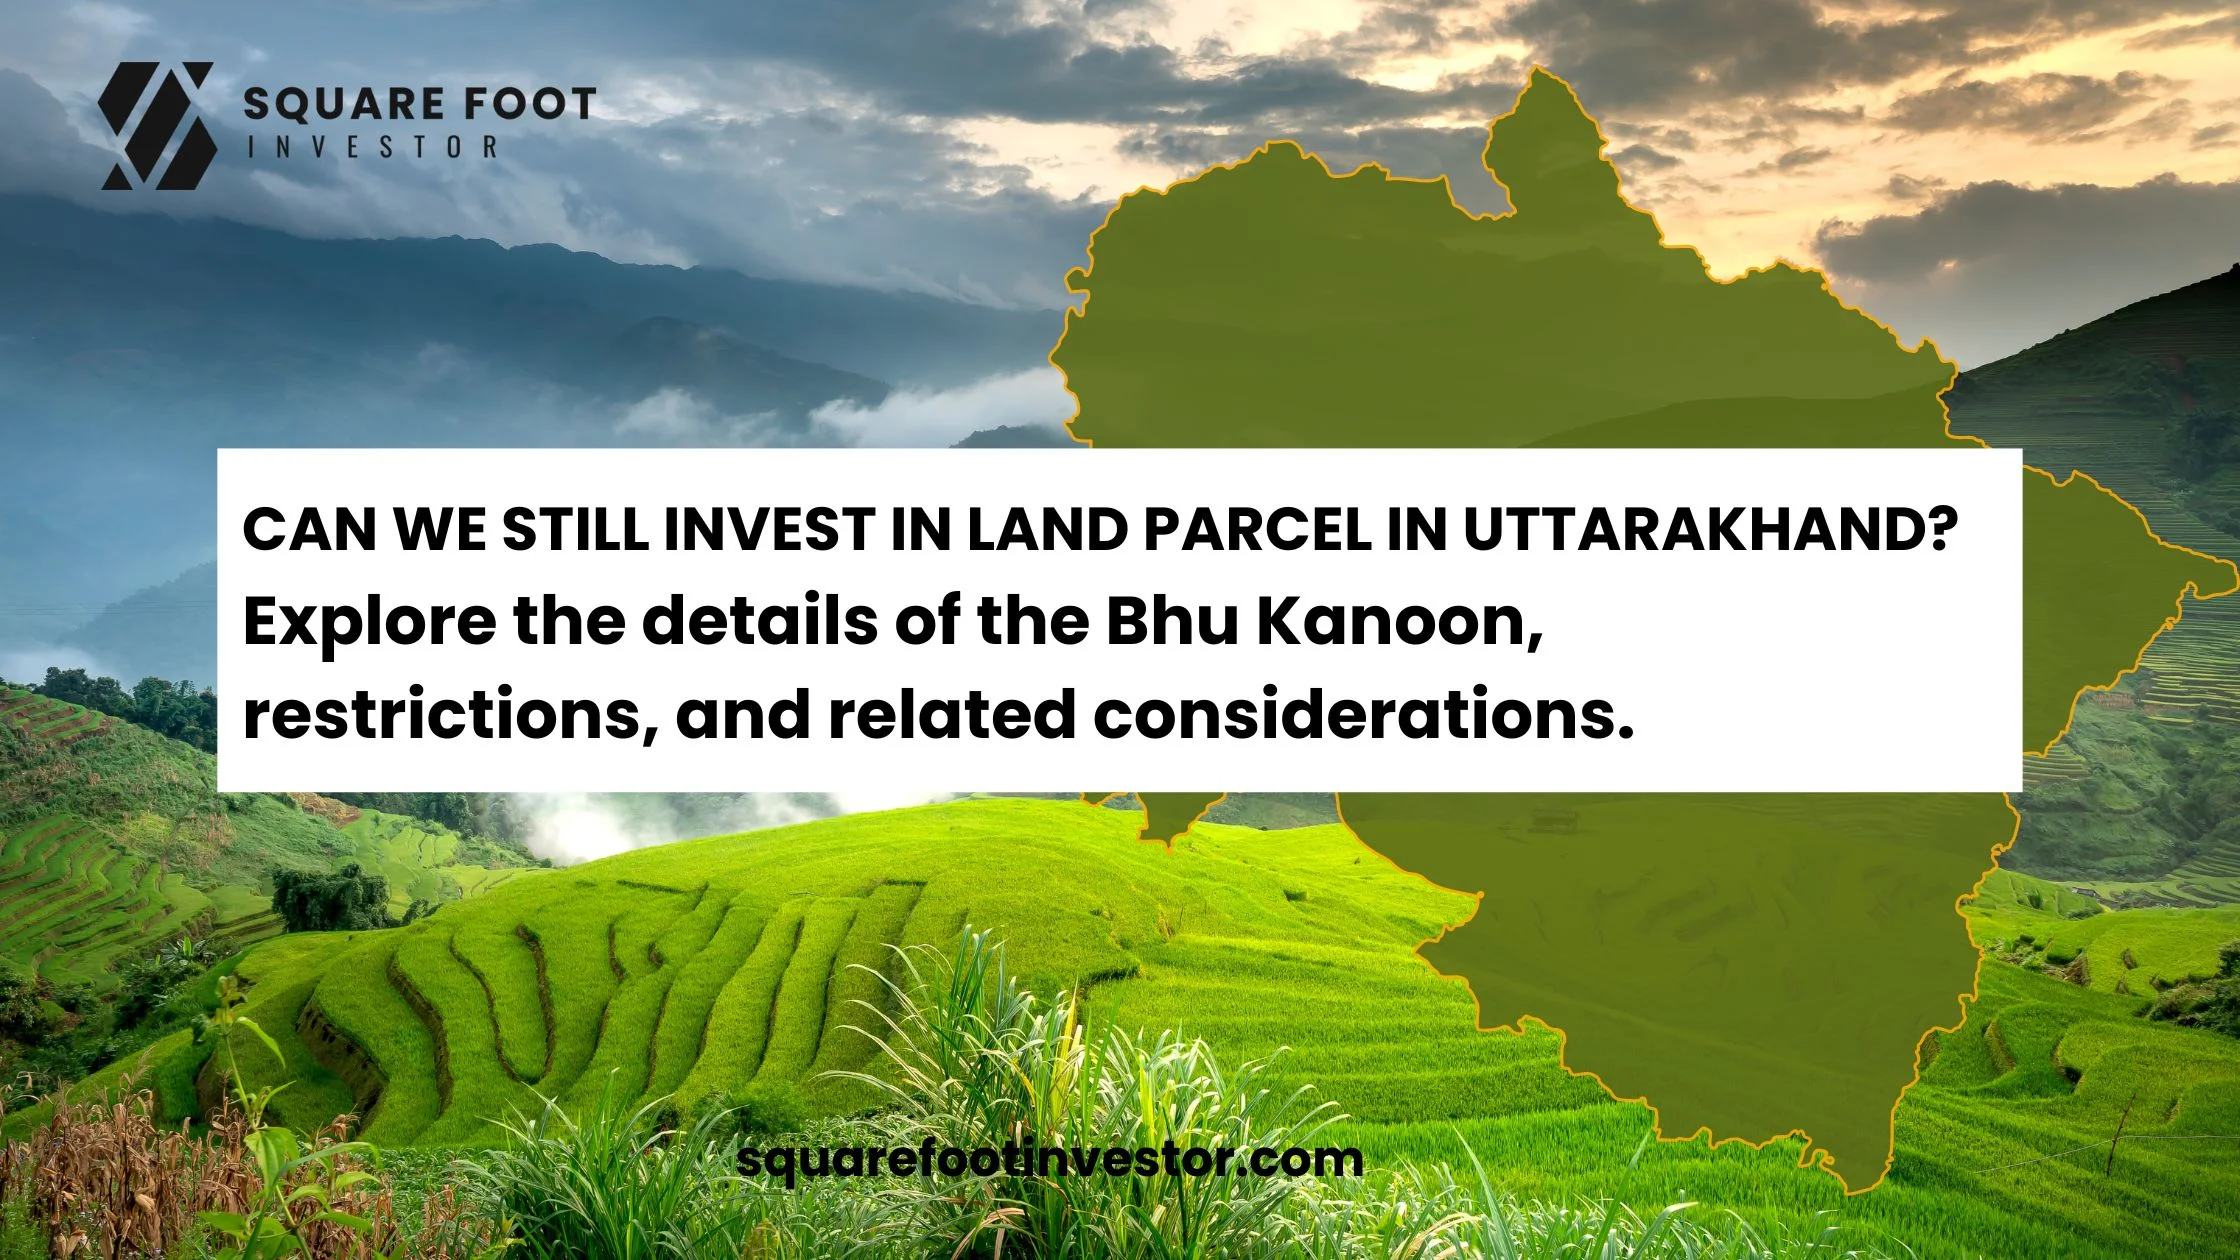 Can we still invest in land parcel in Uttarakhand? Exploring the details of the Bhu Kanoon, restrictions, and related considerations.